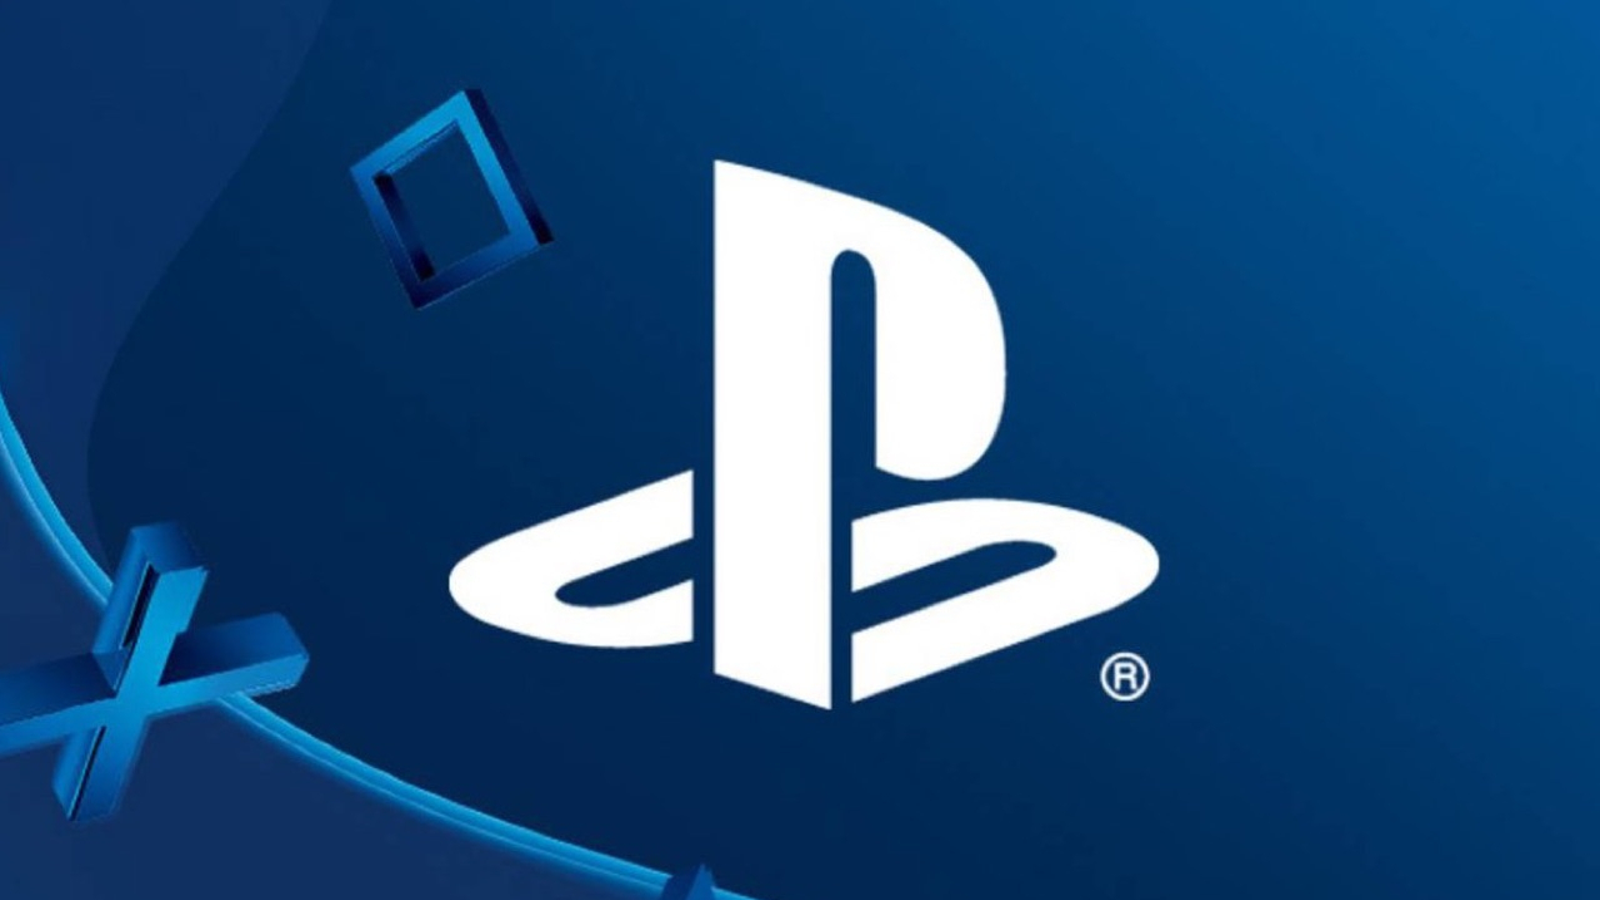 PlayStation Plus is having a free online multiplayer weekend from Saturday